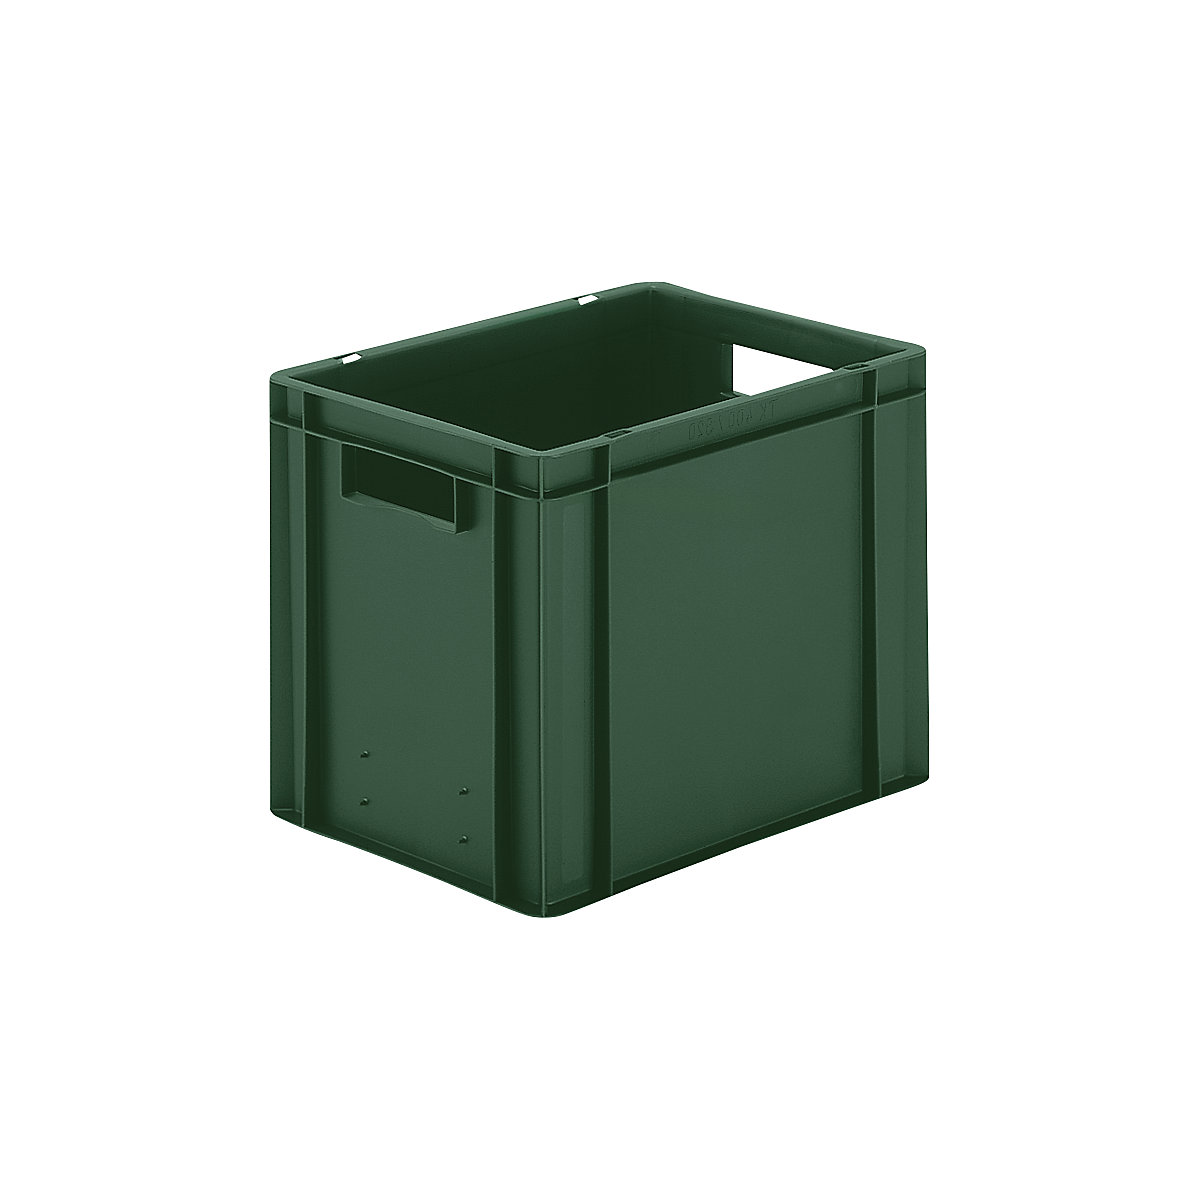 Euro stacking container, closed walls and base, LxWxH 400 x 300 x 320 mm, green, pack of 5-8